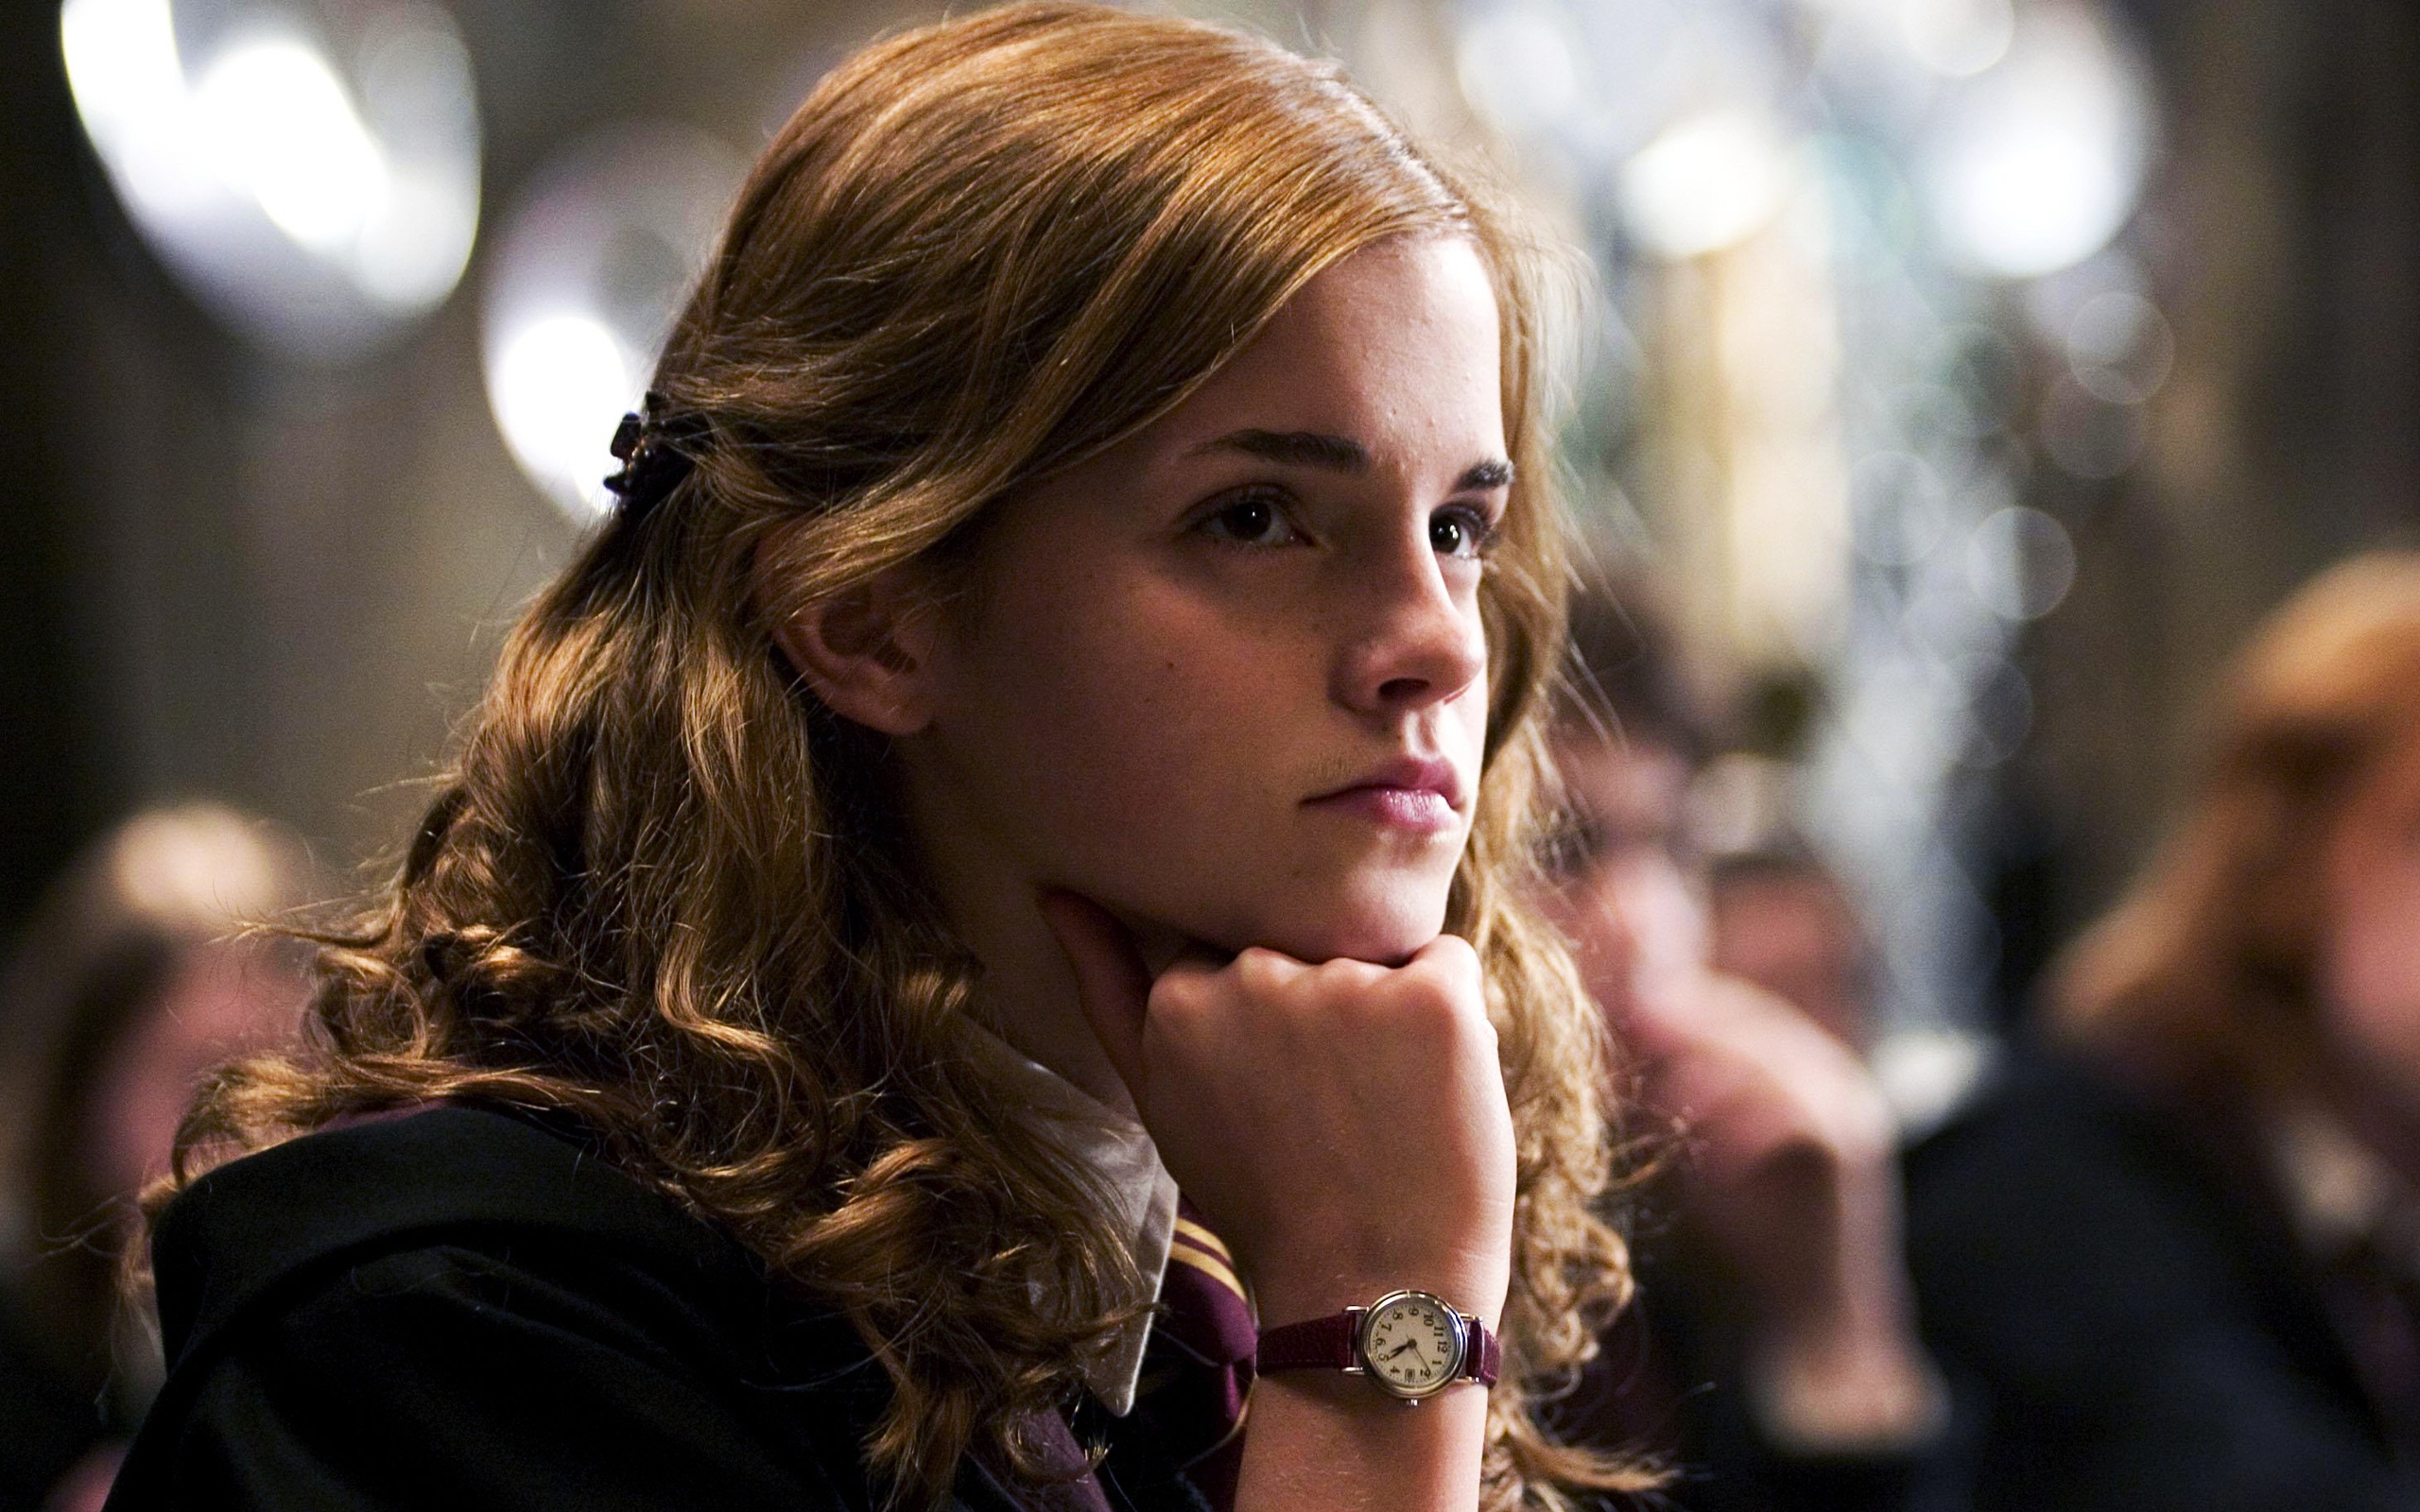 hermione granger hd wallpapers,hair,hairstyle,blond,beauty,lip